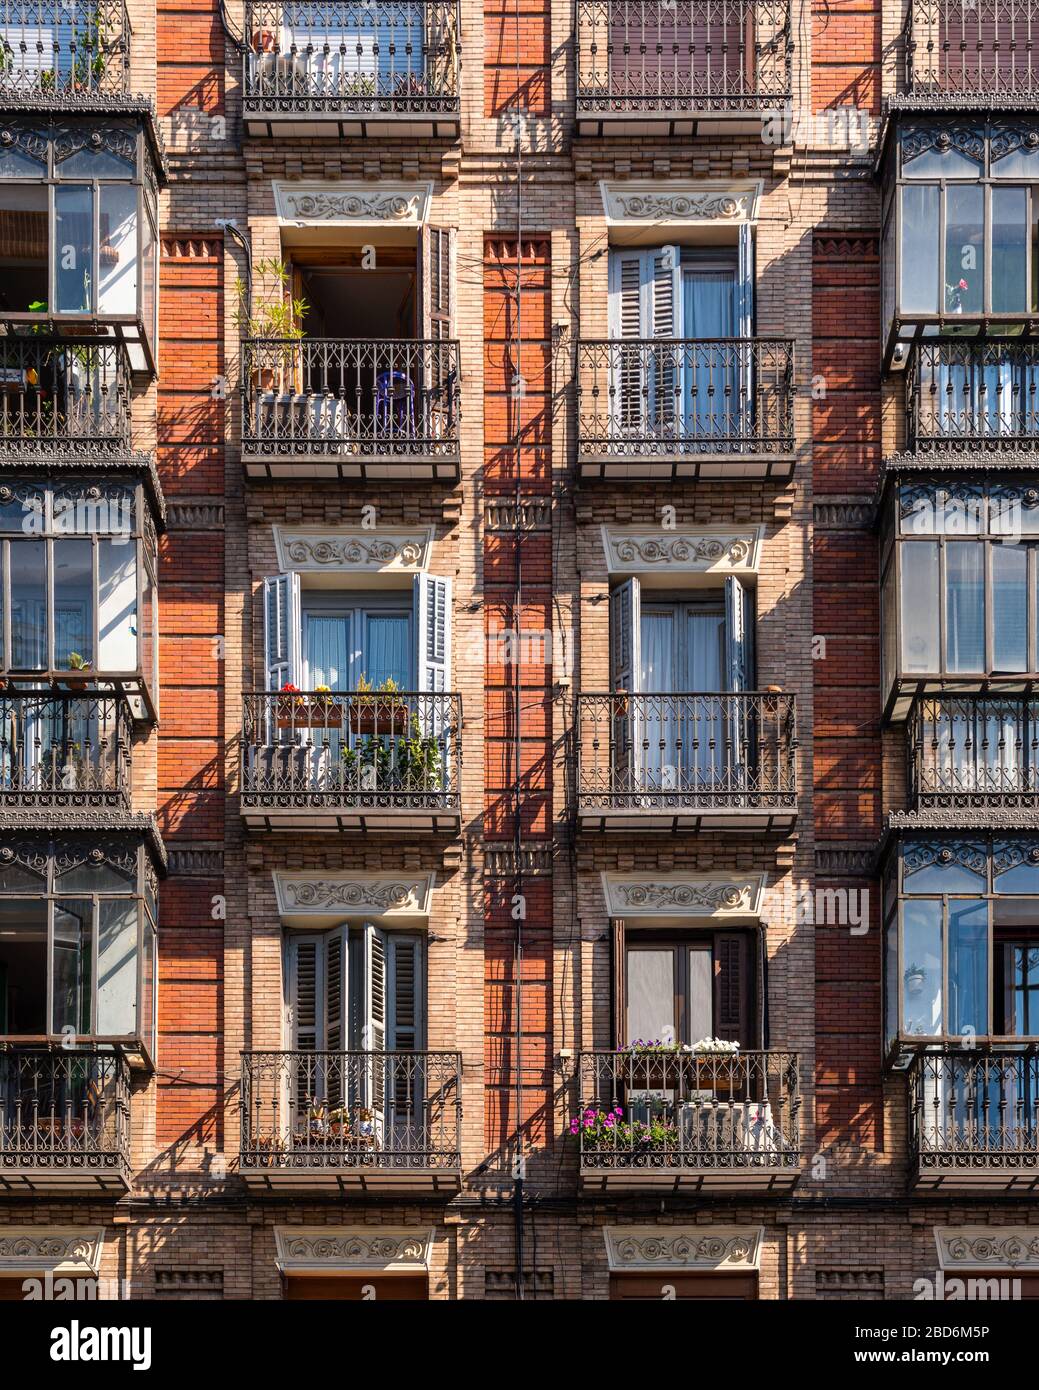 Looking at elegant assorted shuttered balconies on the side of a period building Stock Photo